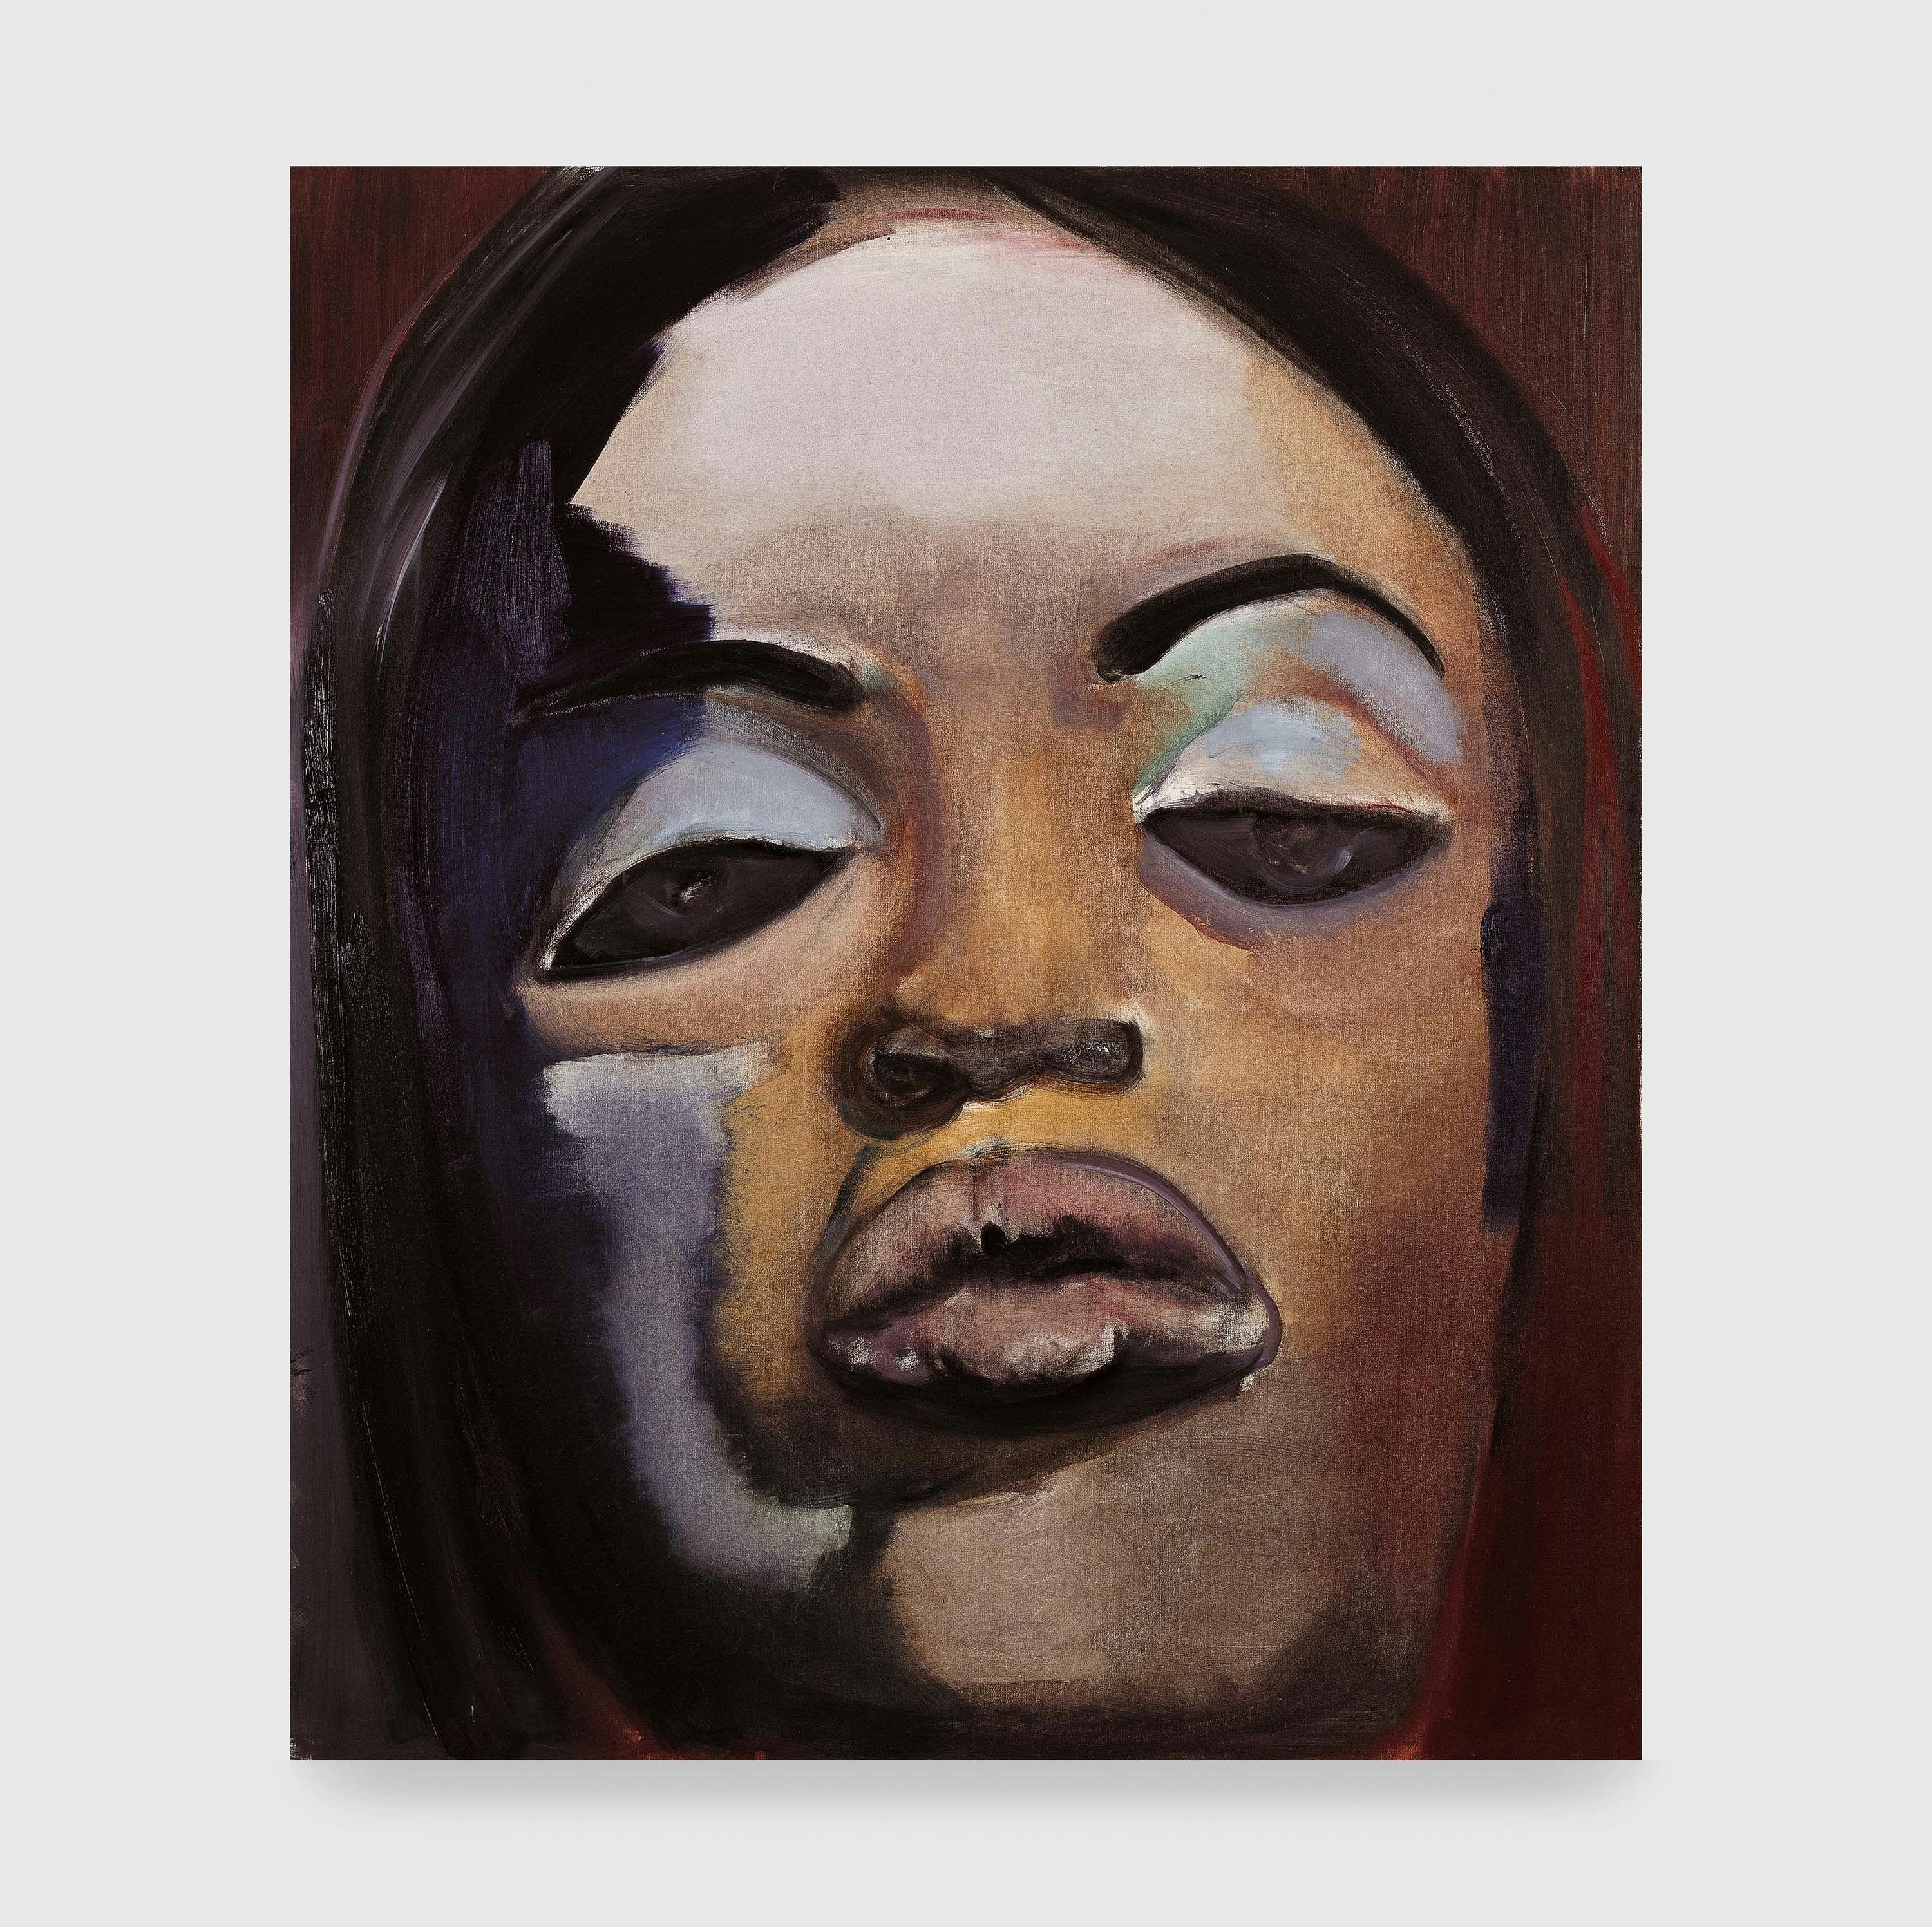 A painting by Marlene Dumas, titled Naomi, dated 1995.